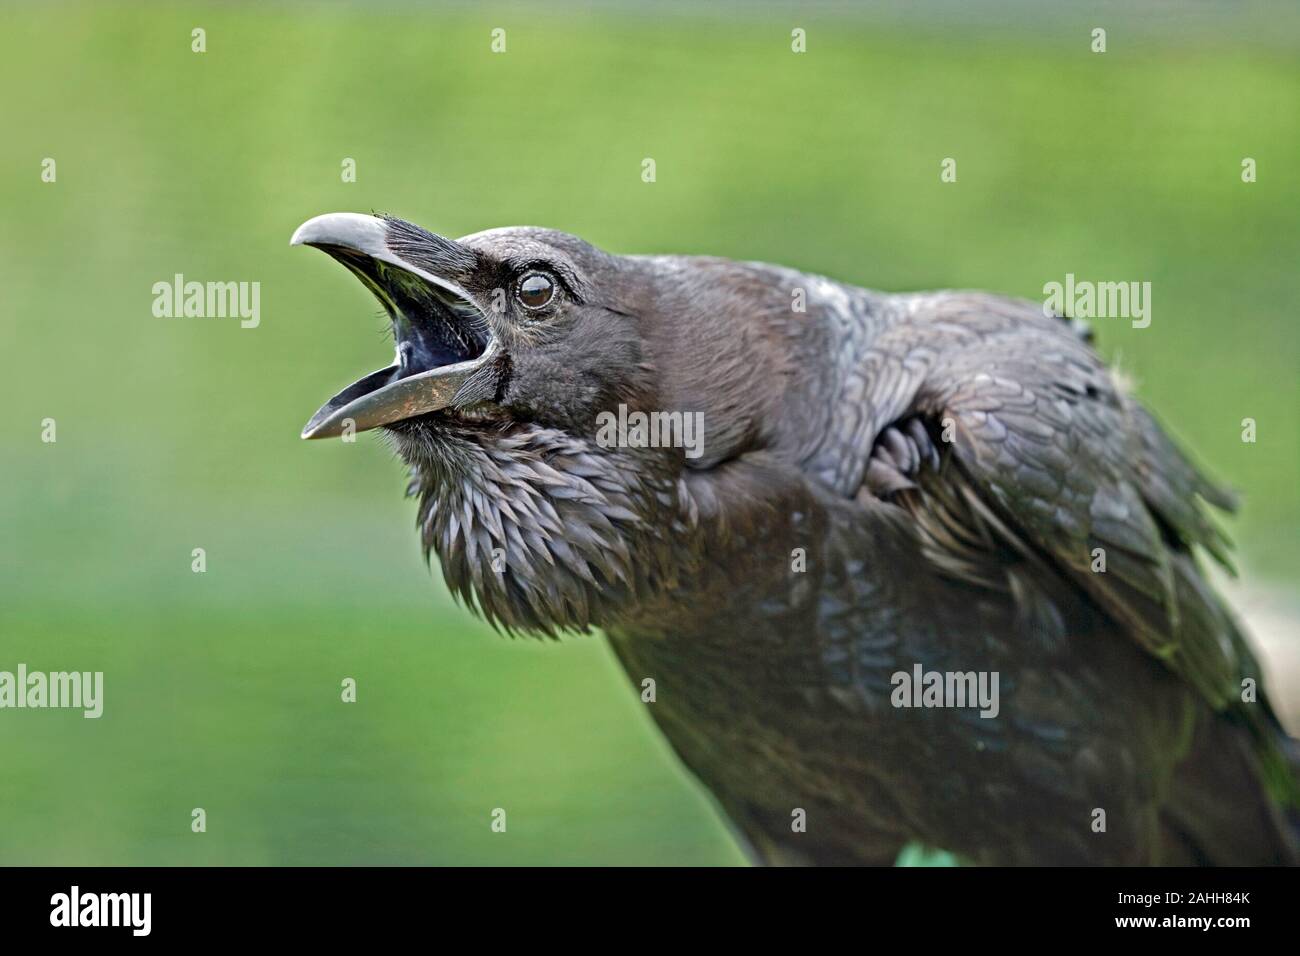 RAVEN (Corvus corax) calling or croaking. HEAD DETAIL, WITH MANDIBLES WIDE OPEN. TOWER OF LONDON. ENGLISH HISTORY. Stock Photo